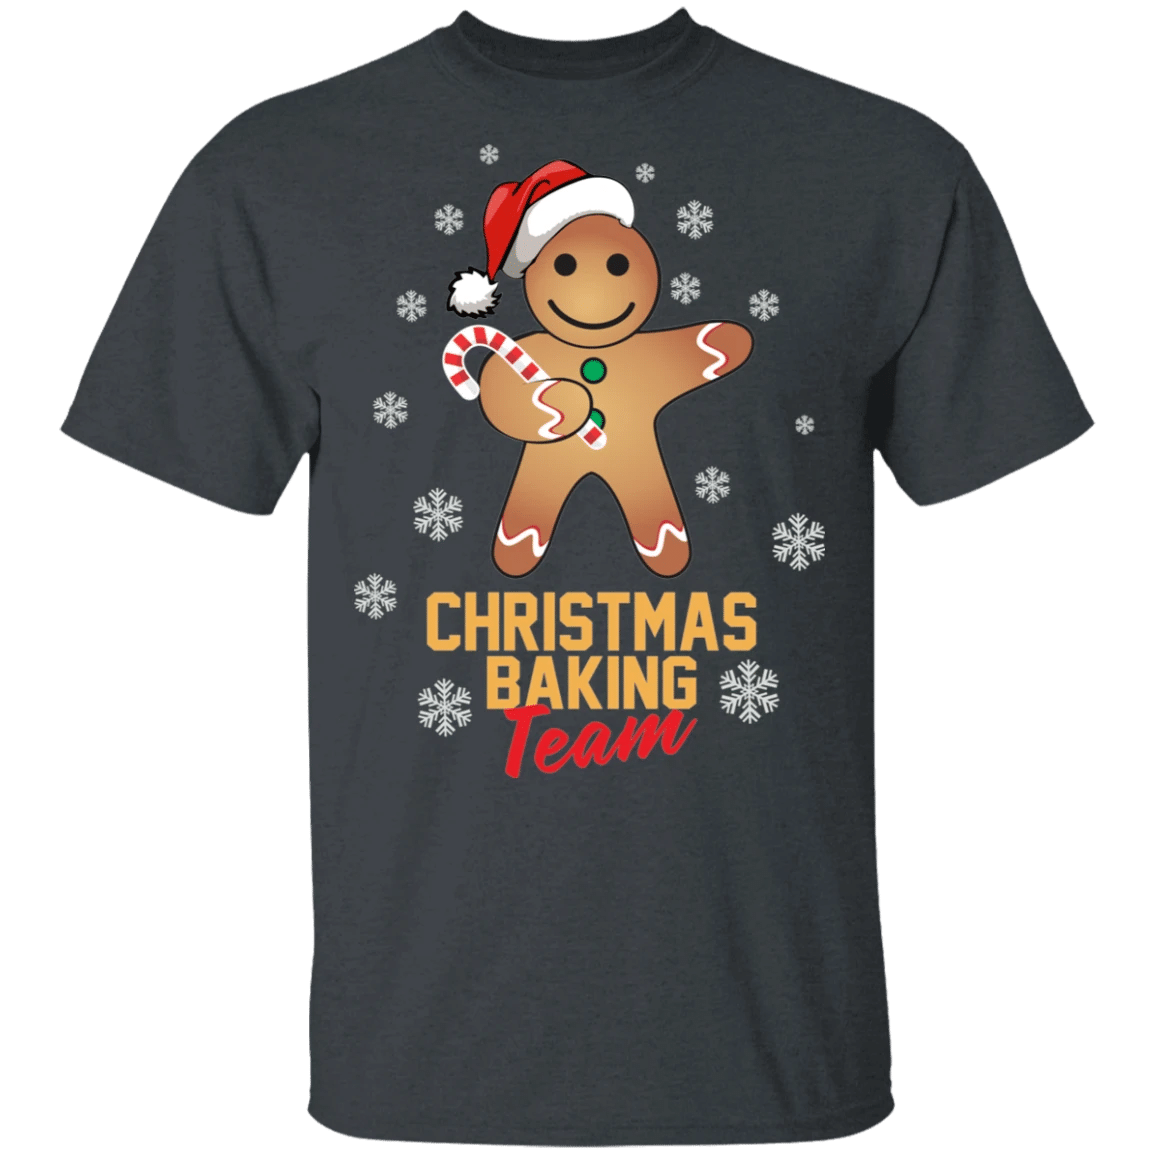 Christmas Baking Team Gingerbread Man Santa With Candy Cane Christmas T-Shirt Style: Unisex T-shirt, Color: Dark Heather